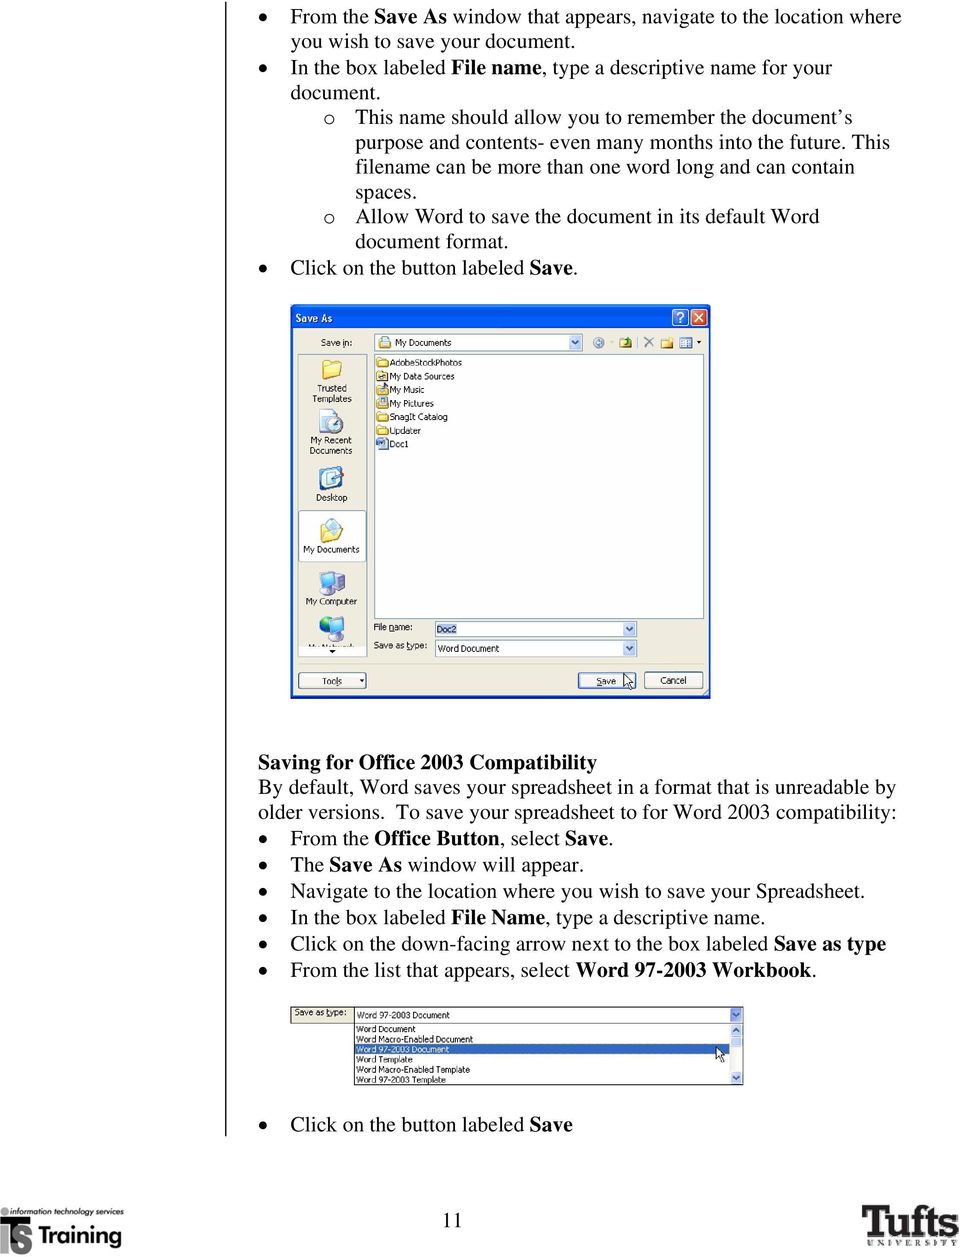 o Allow Word to save the document in its default Word document format. Click on the button labeled Save.